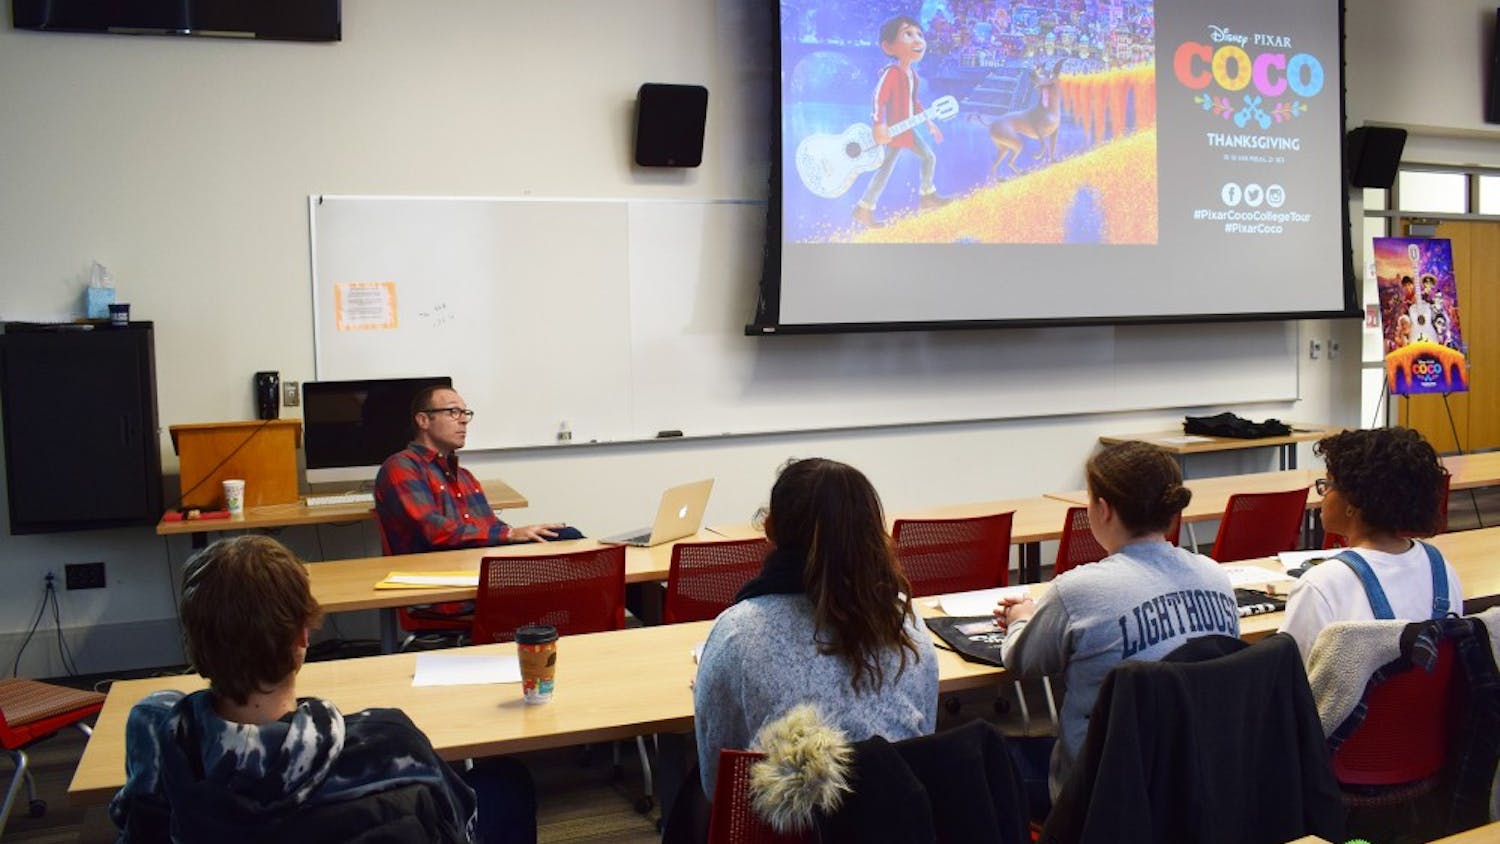 "Coco" story supervisor Jason Katz gives a presentation to students about the film in SOC on Monday, Nov. 13.